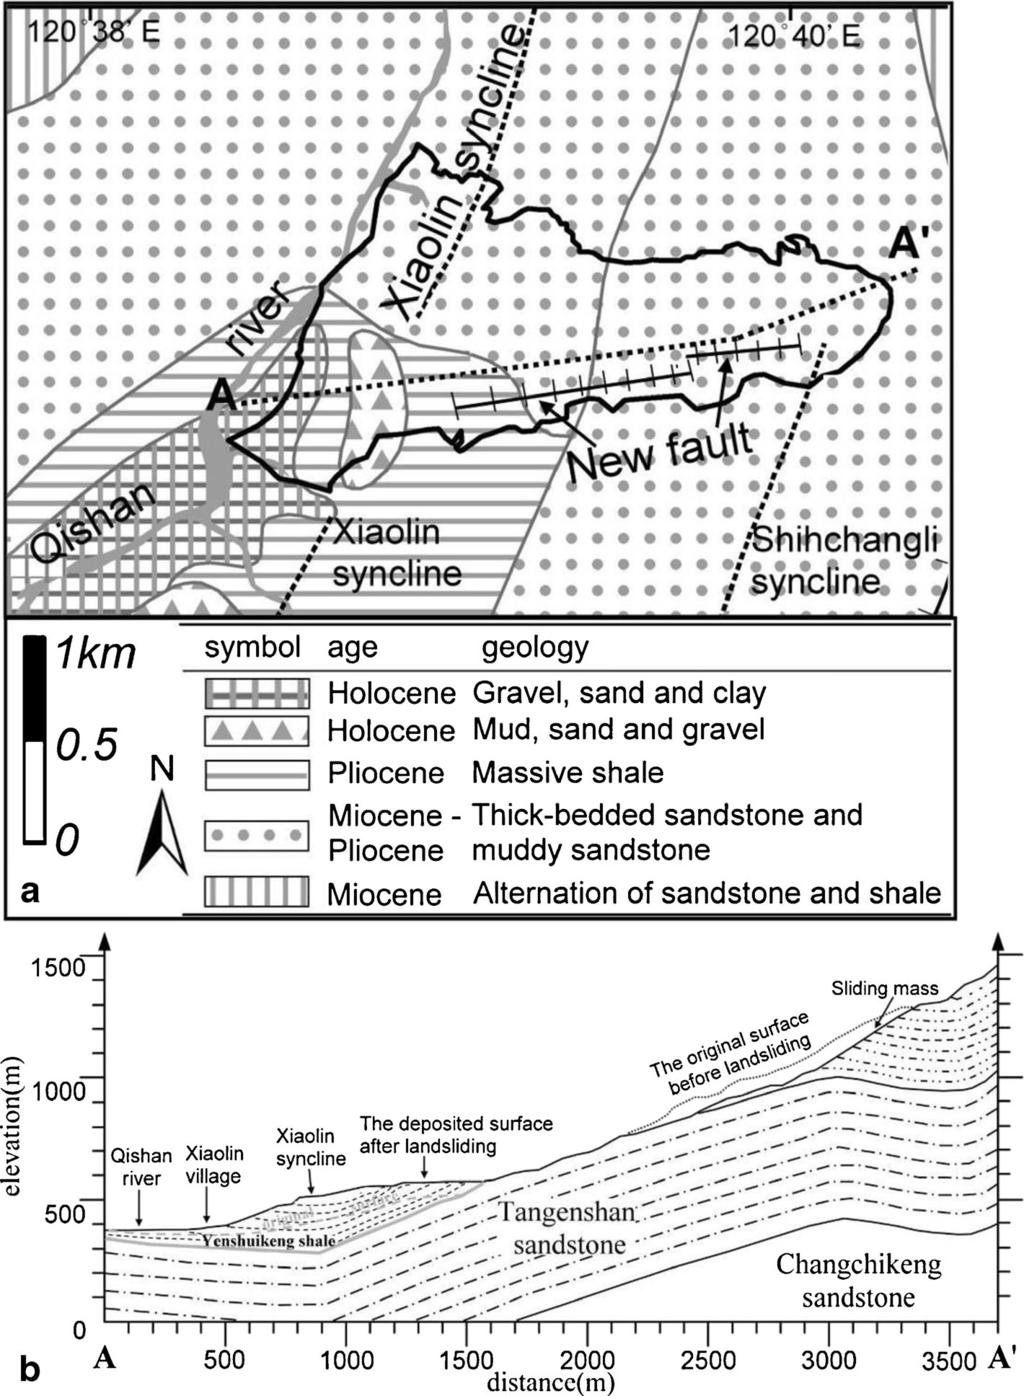 Fig. 2 a The geological setting (Wu et al. 2011) and b the geological section map (Lee et al. 2009) of the Xiaolin landslide. The new fault within the Xiaolin landslide area was found by Lee et al.